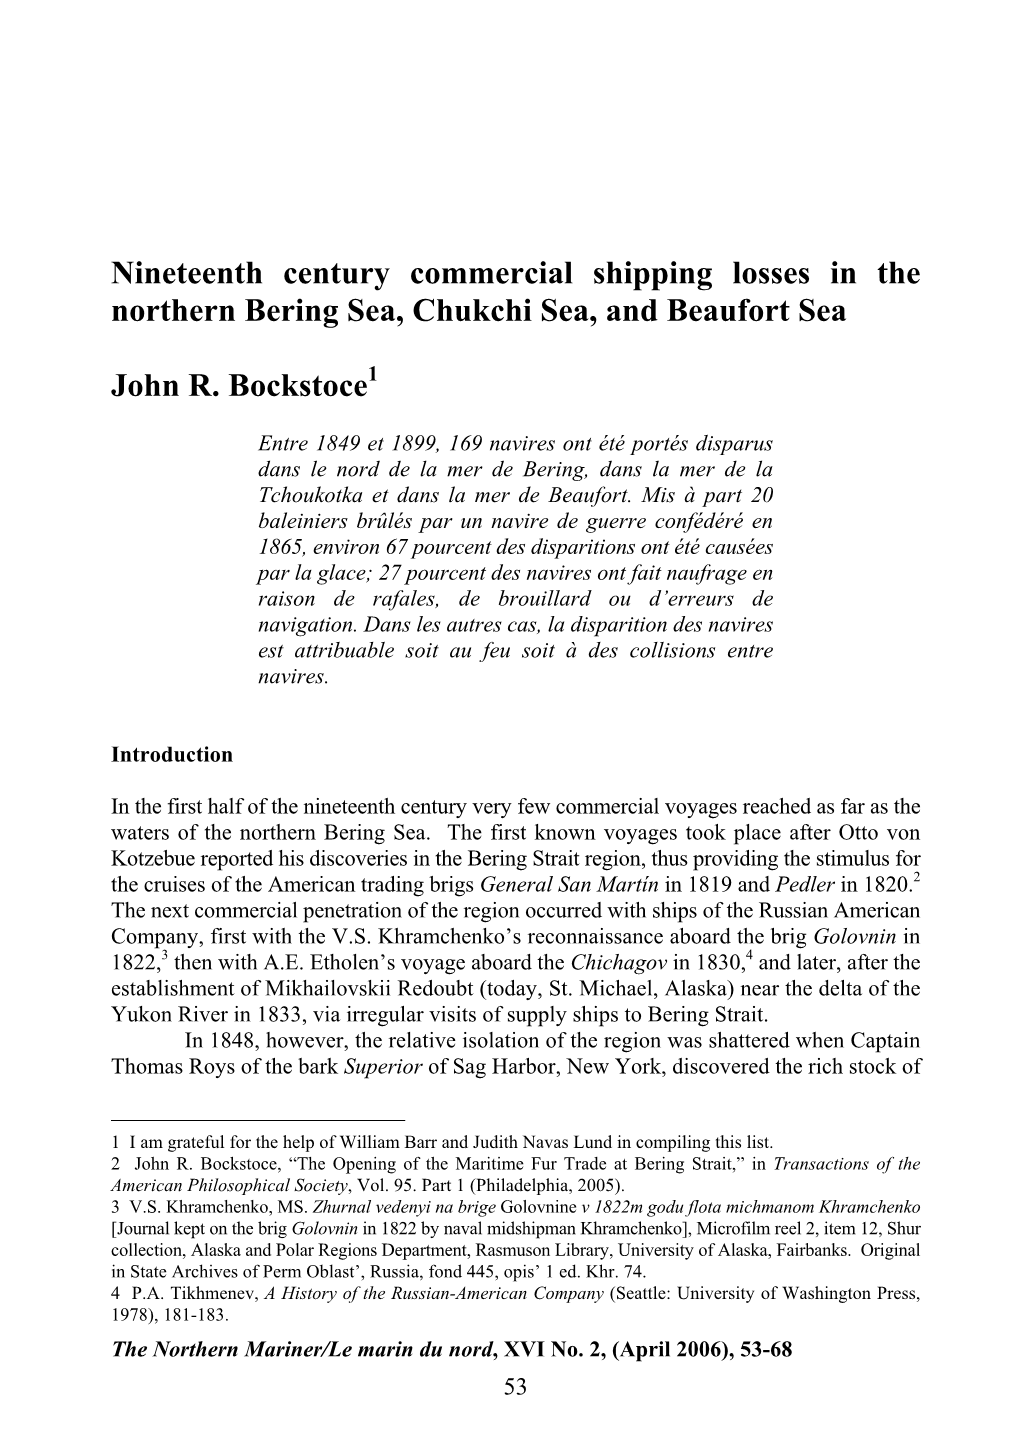 Nineteenth Century Commercial Shipping Losses in the Northern Bering Sea, Chukchi Sea, and Beaufort Sea